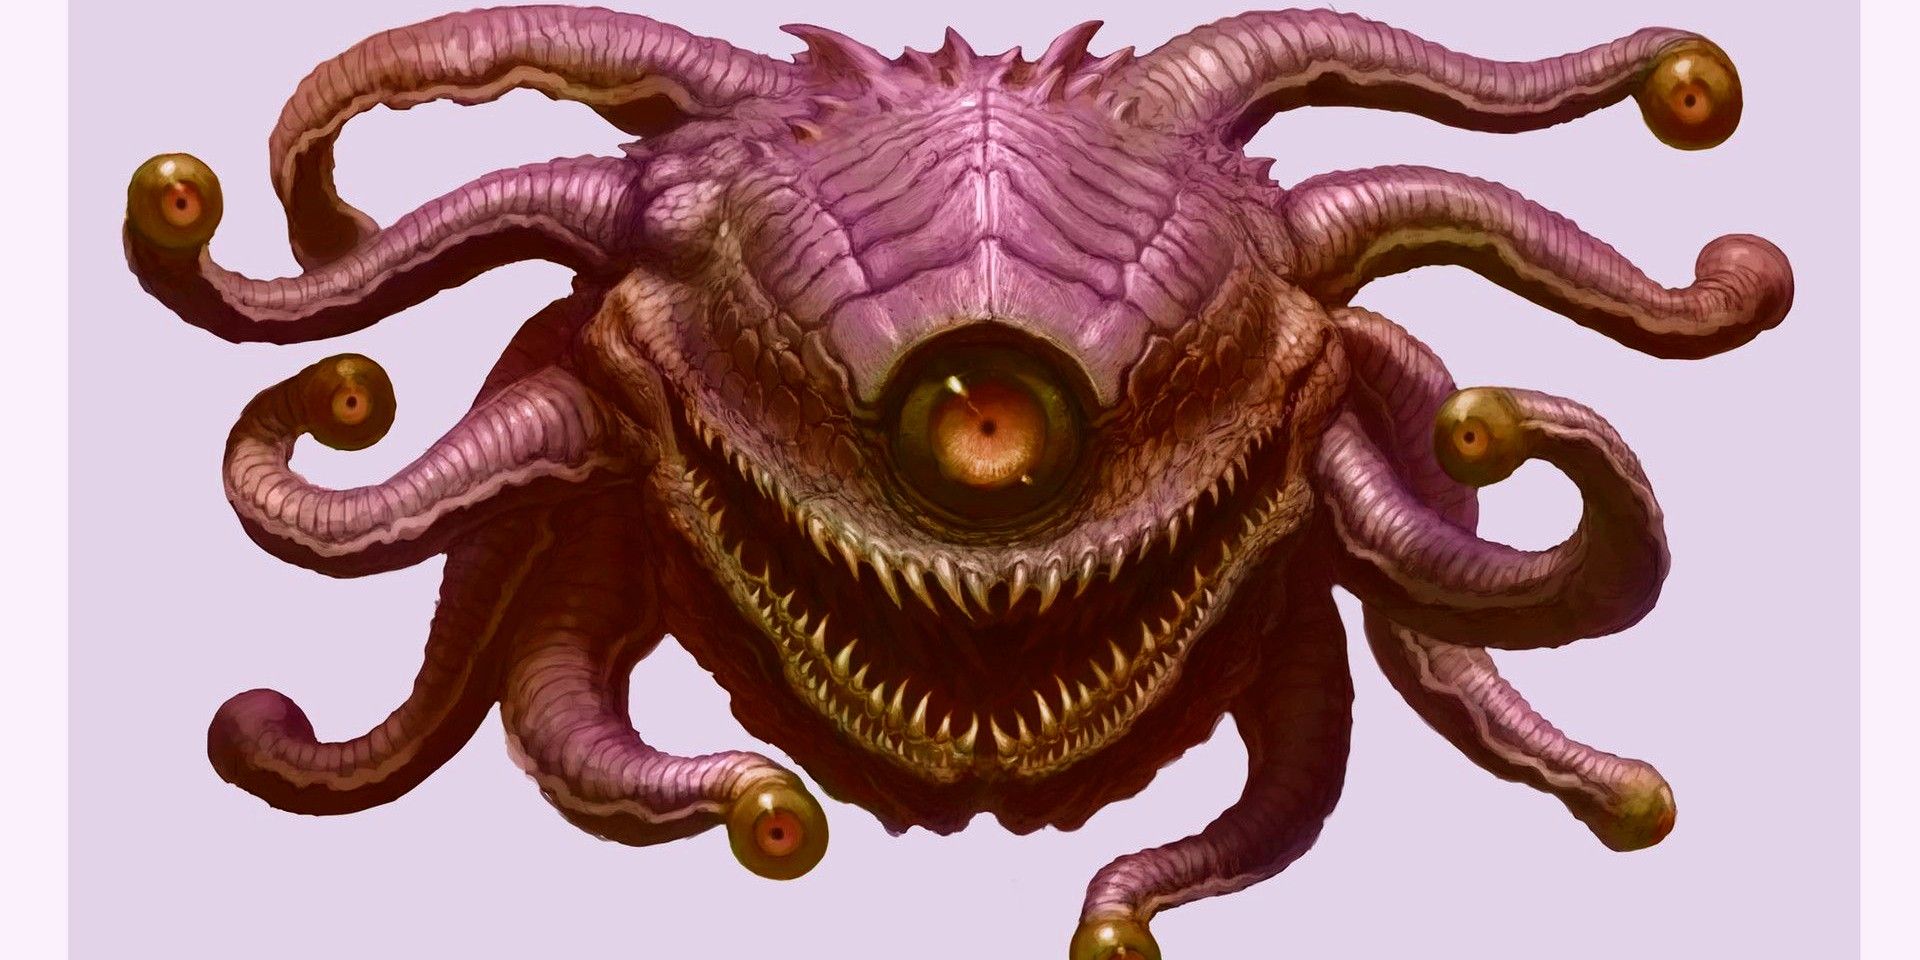 A Beholder from Dungeons and Dragons Hovers